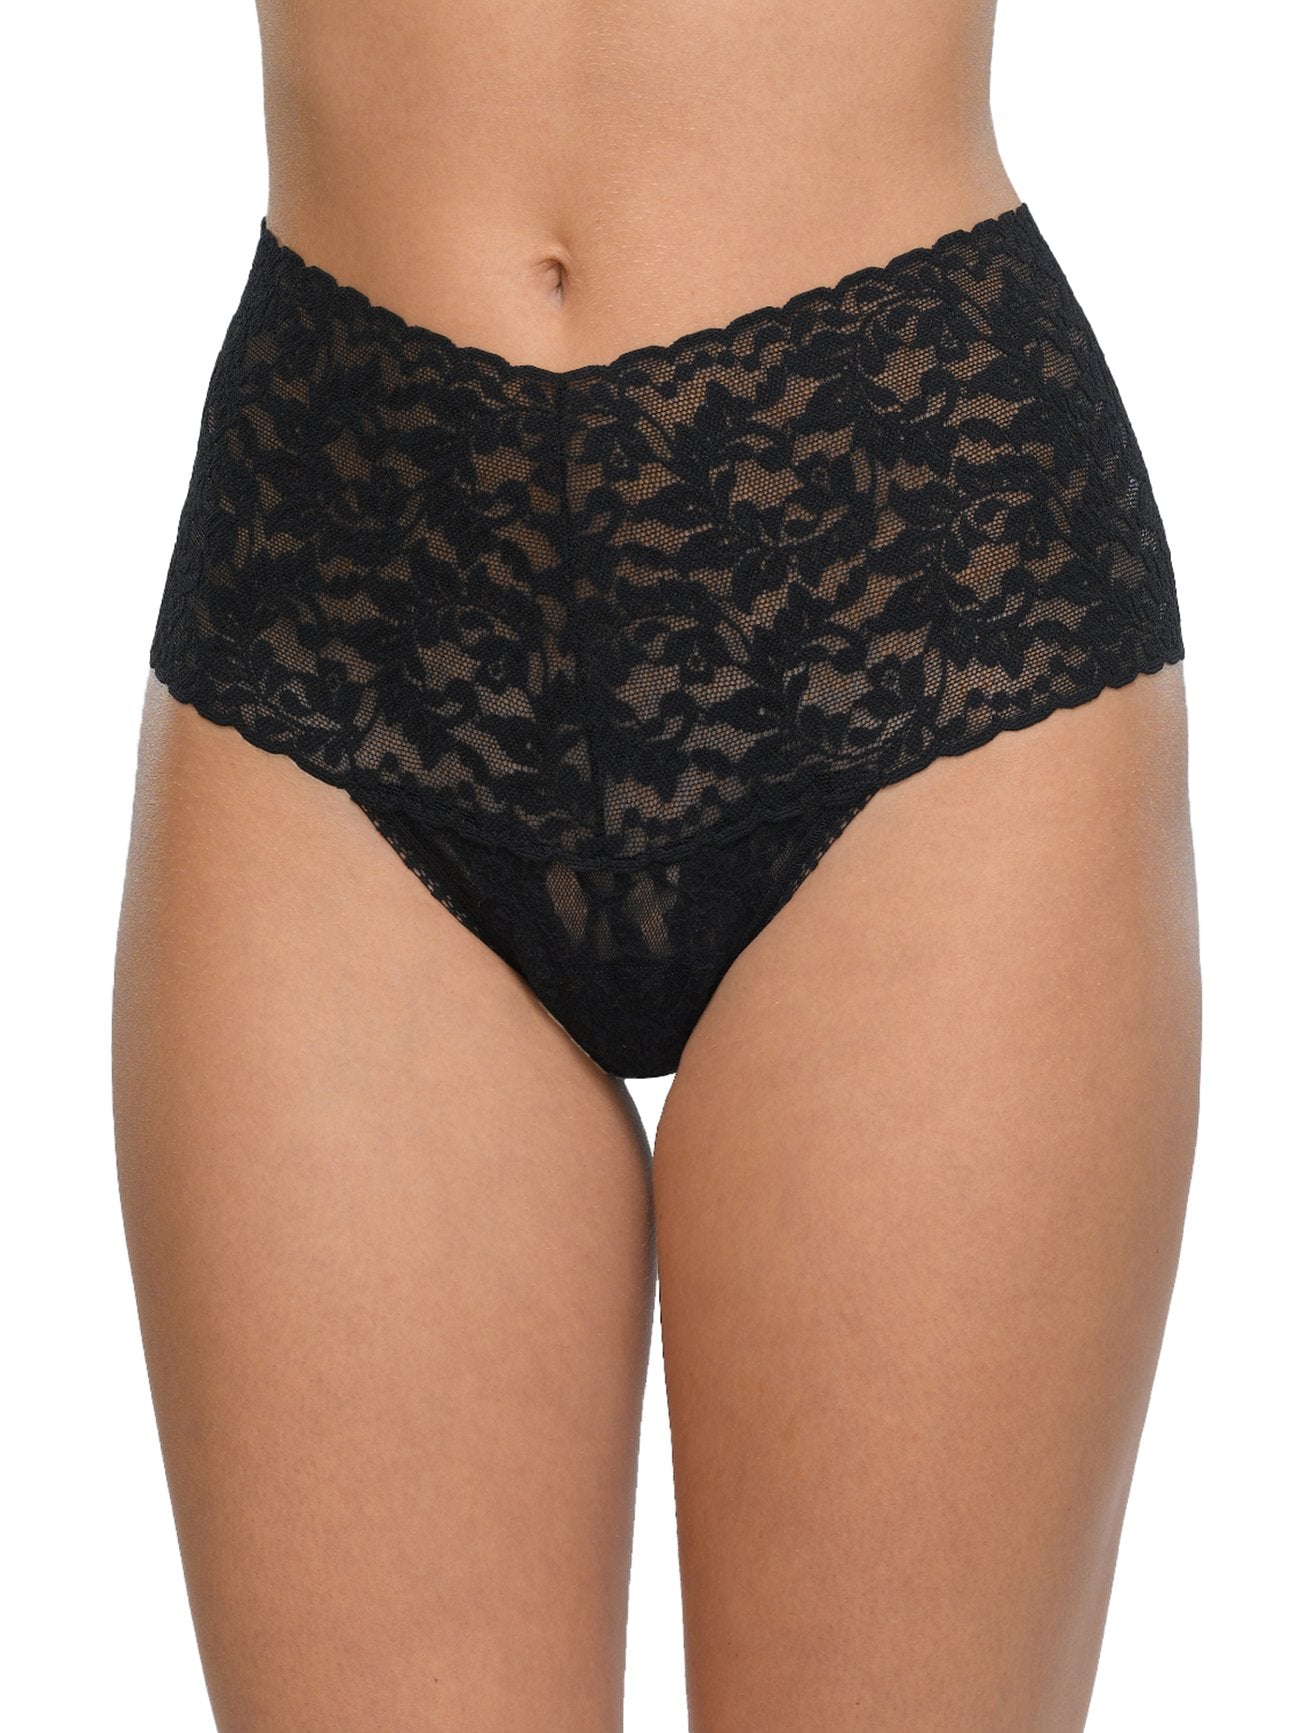 Retro Lace Thong Black Packaged